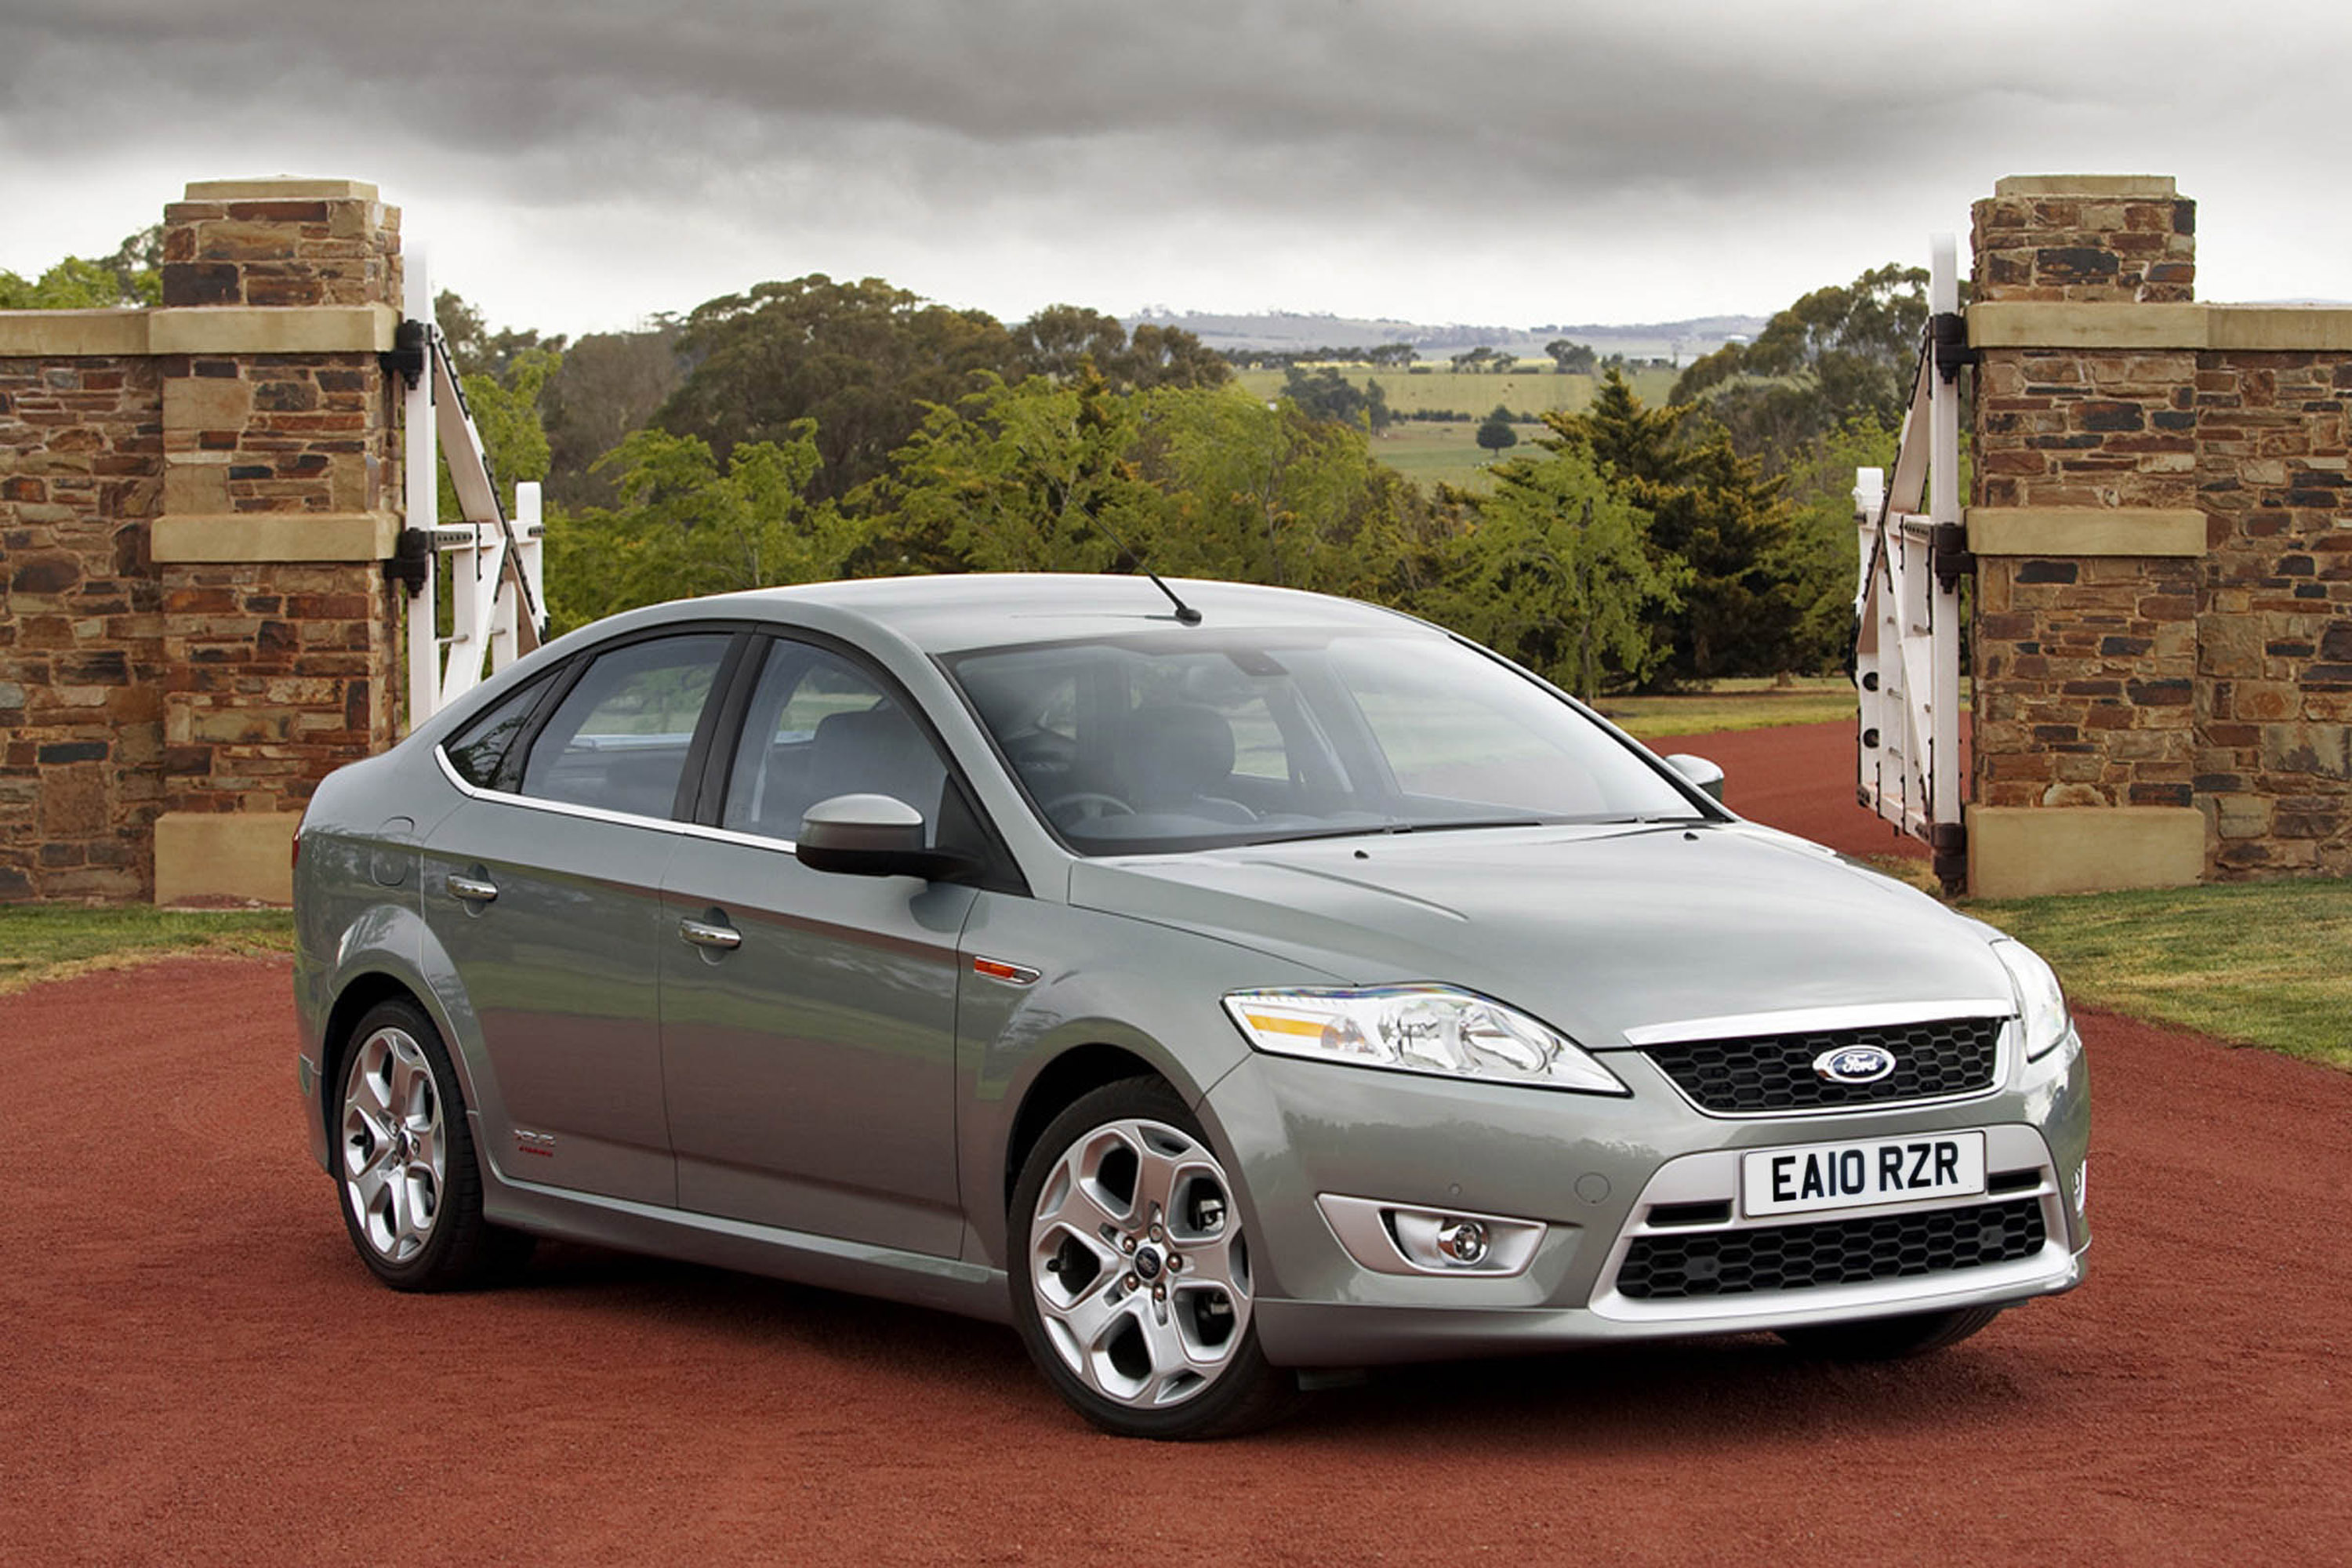 2010 Ford Mondeo comes with improved engine range and equipment